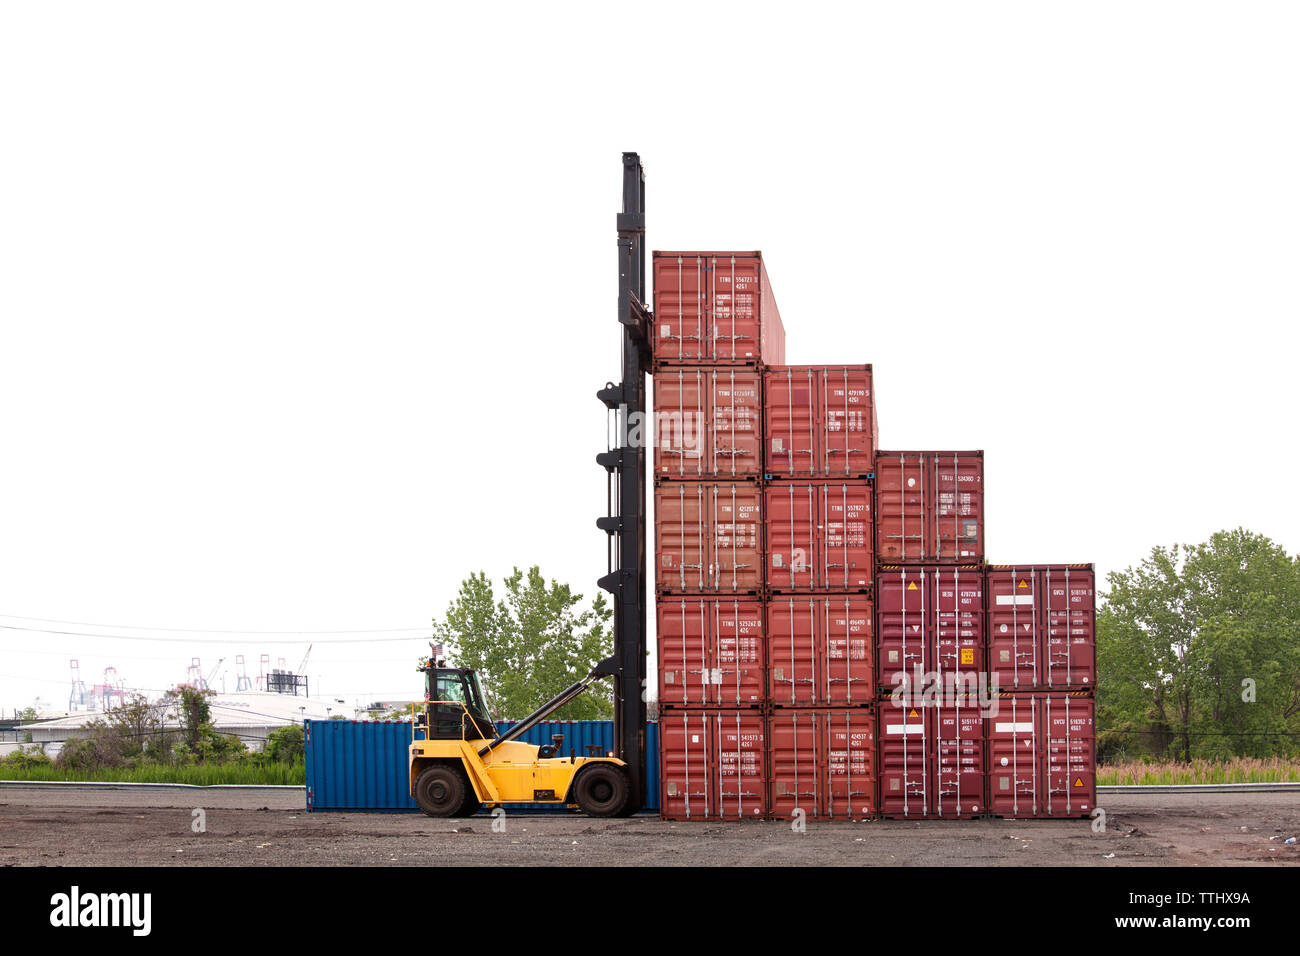 Forklift by cargo containers against clear sky Stock Photo